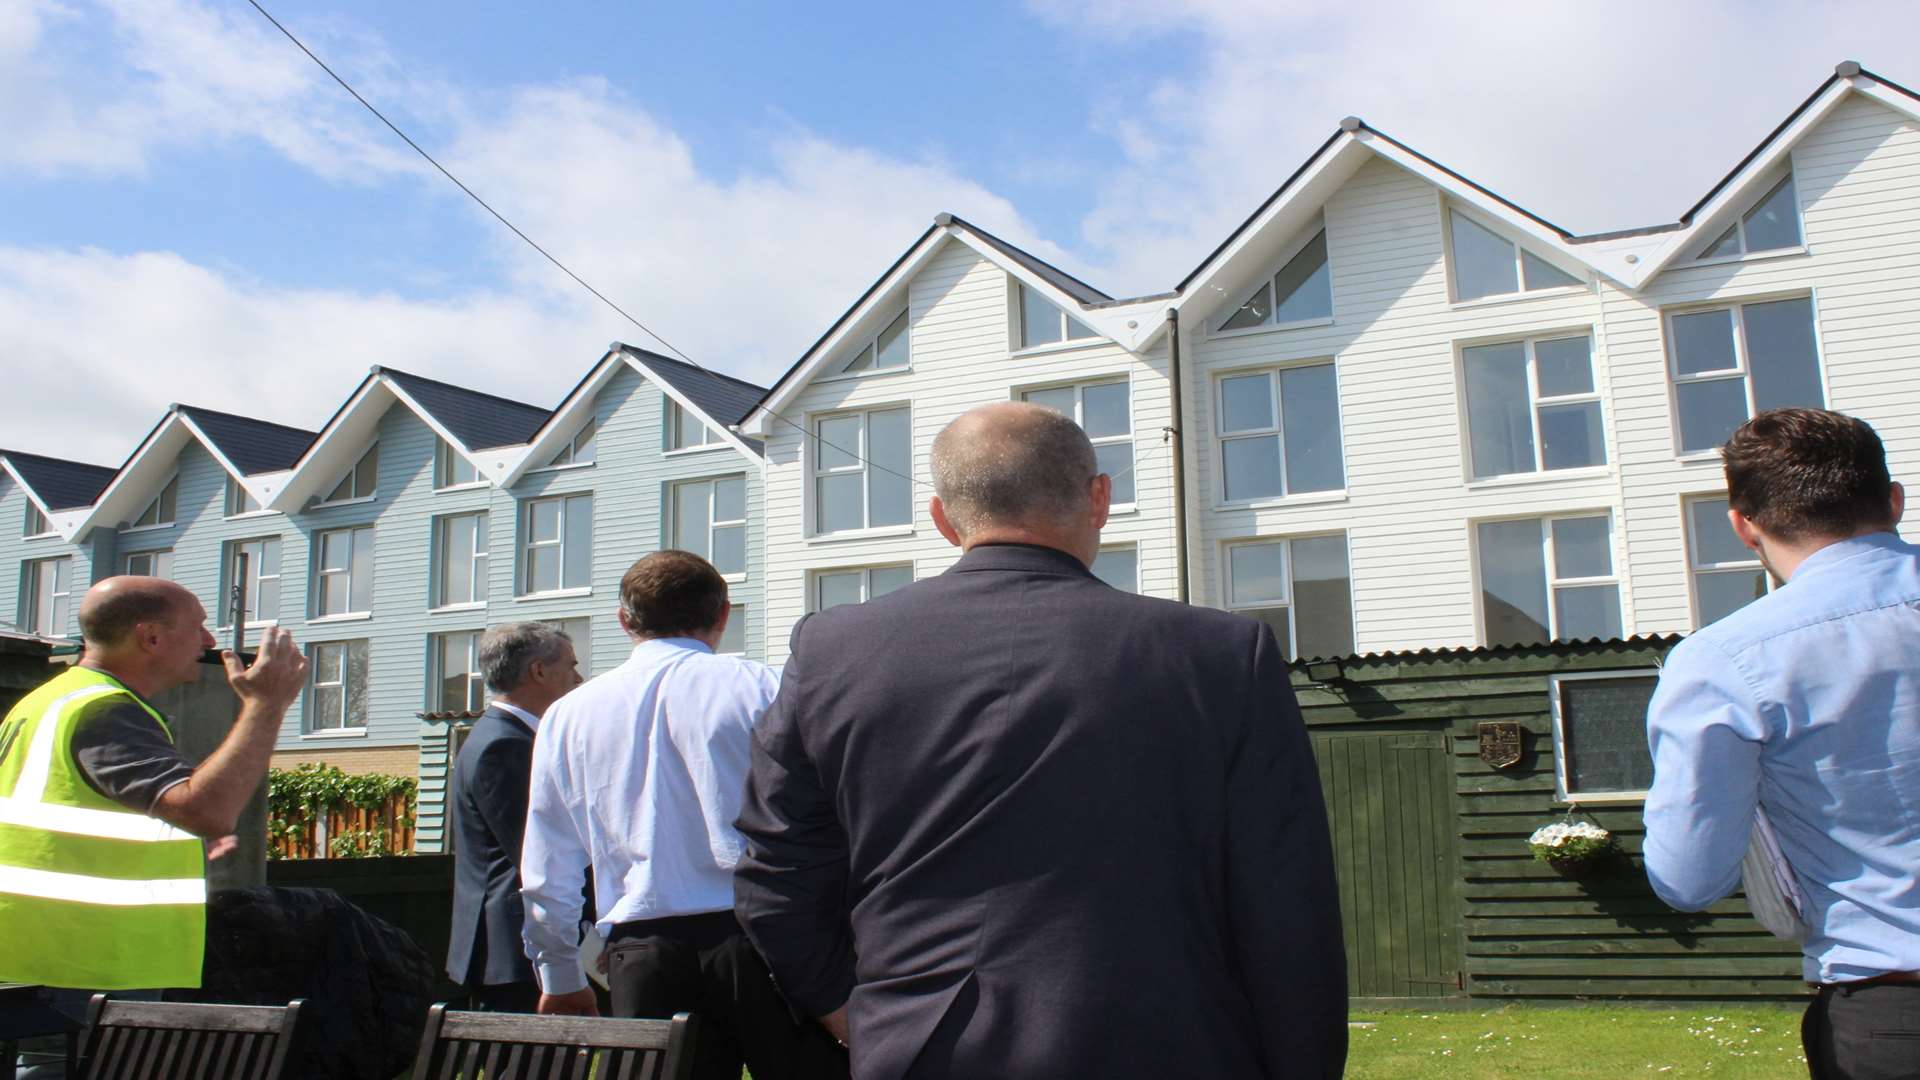 Moat Homes housing development in Seager Road, Sheerness, was subject to a planning appeal by Inspector Chris Preston.